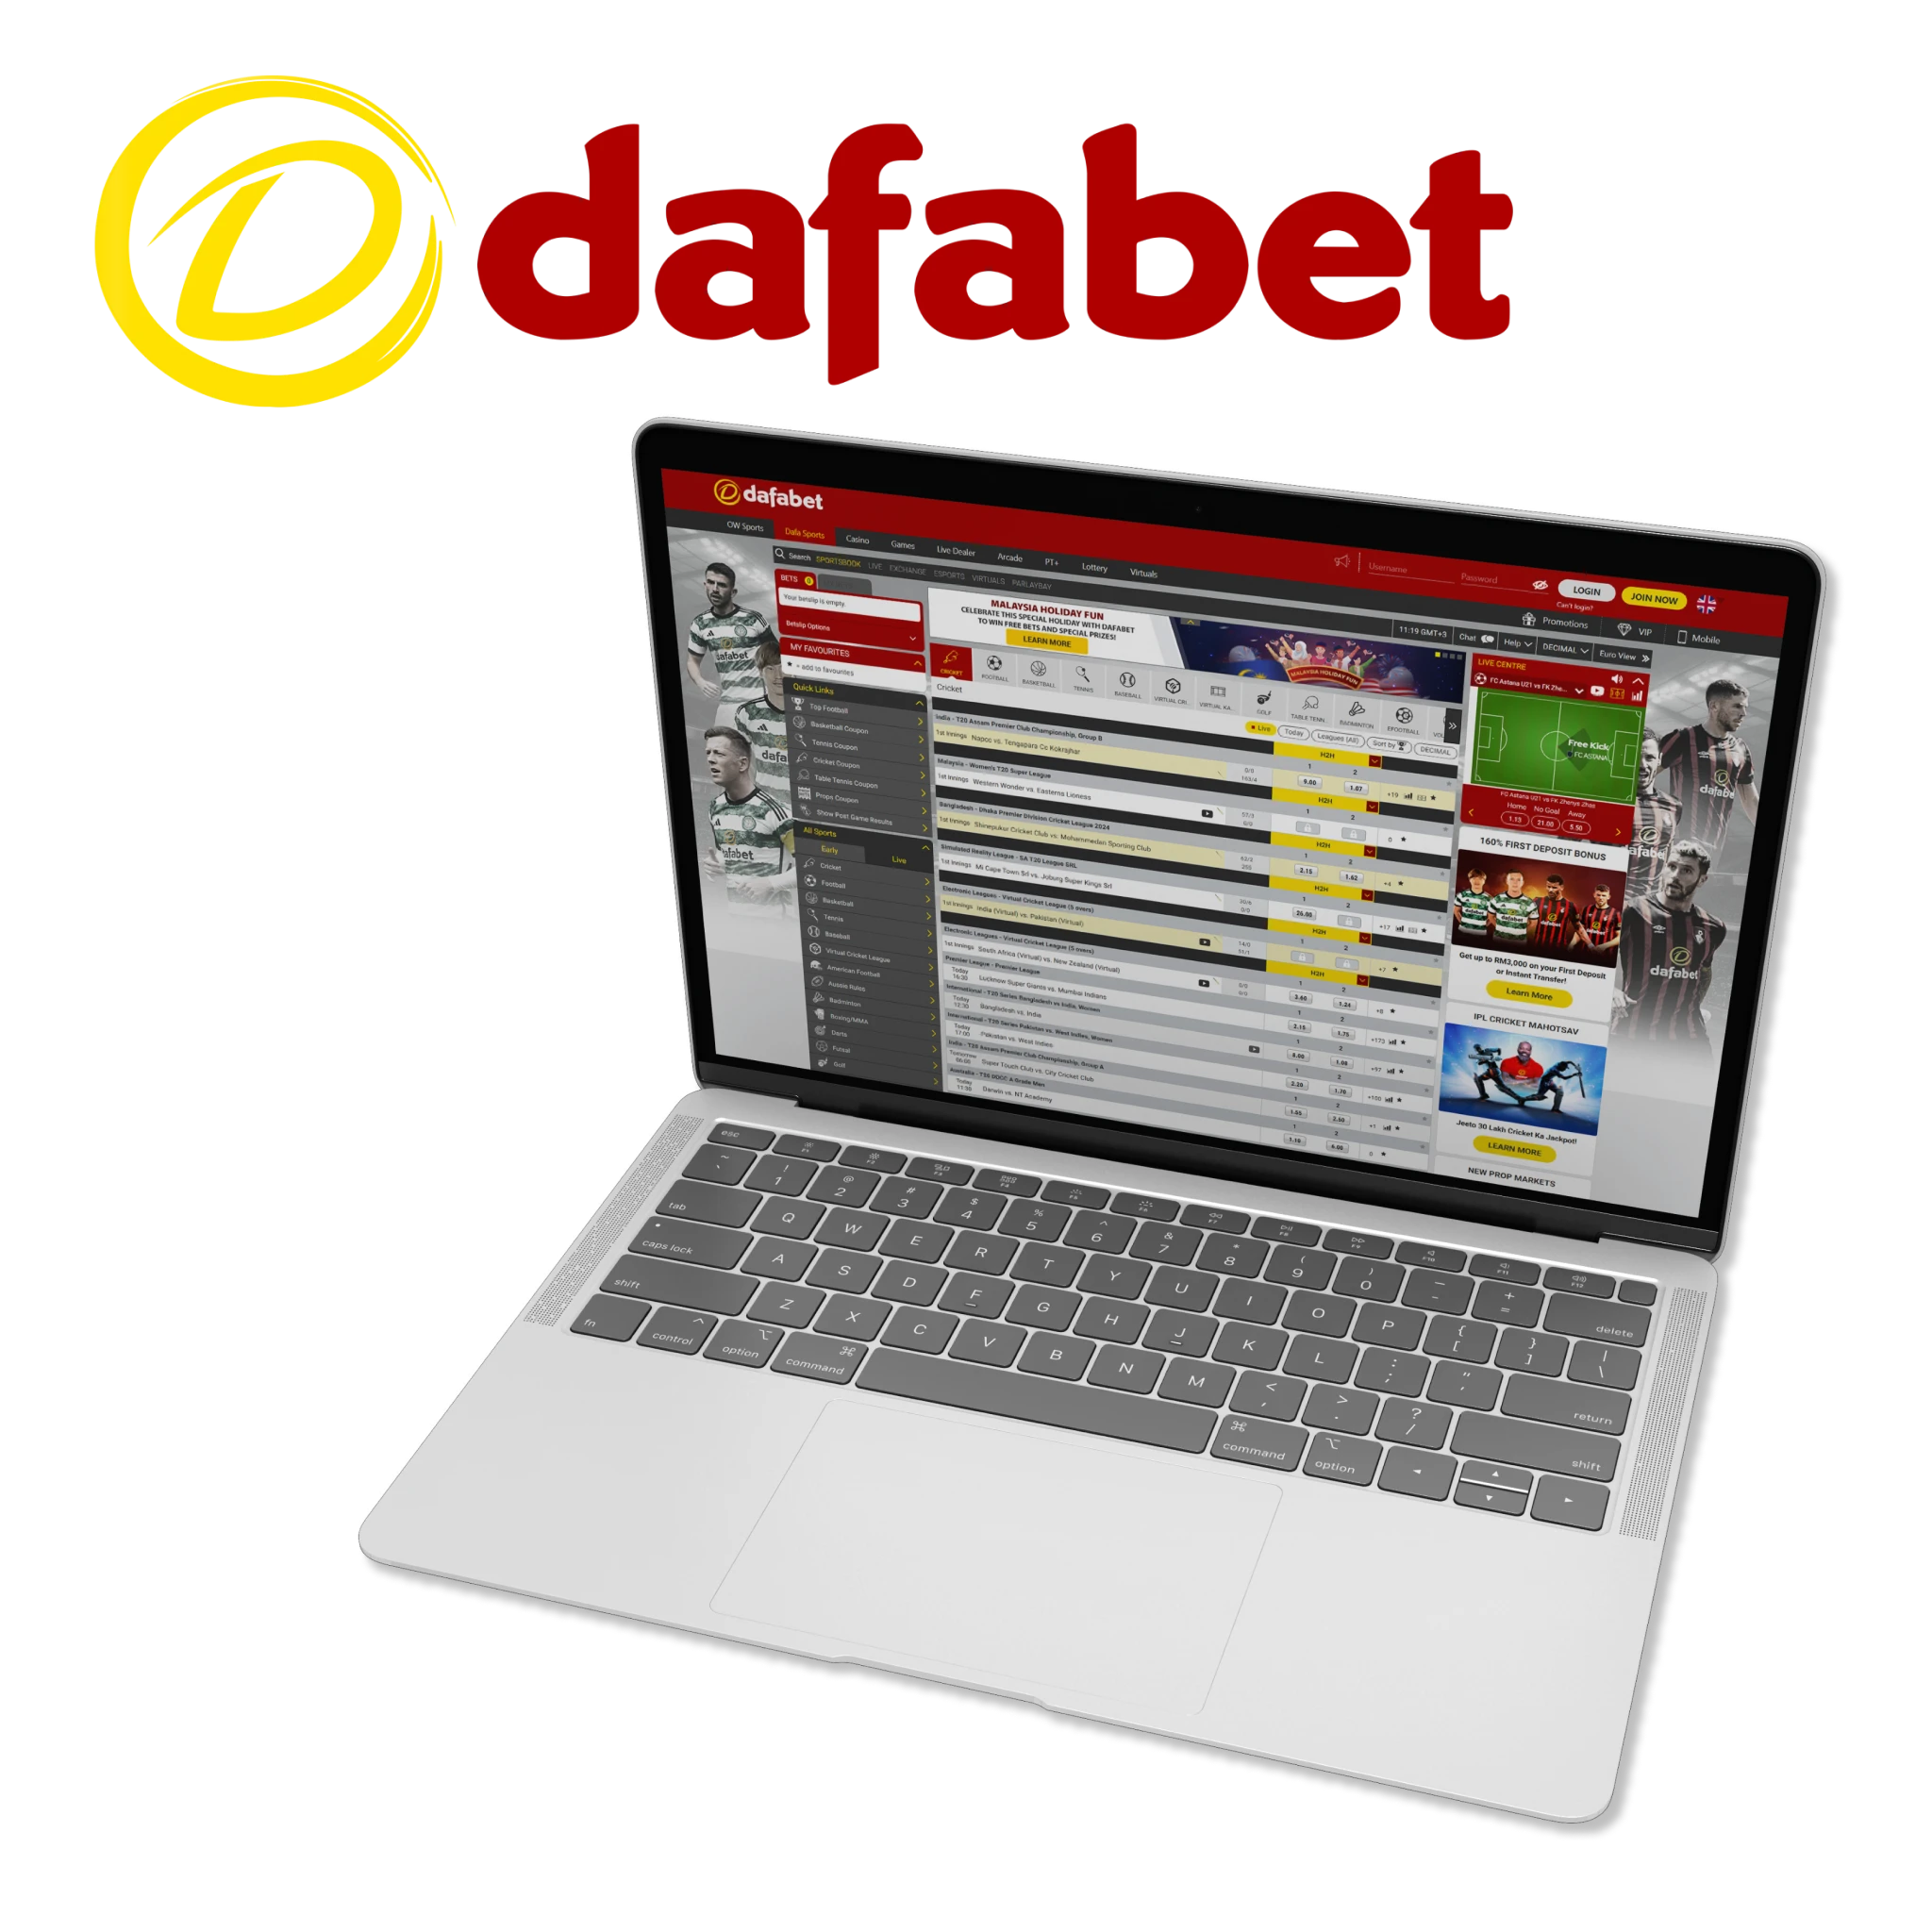 Many players wish to have great conditions for betting, and Dafabet can provide it with confidence and pleasure.